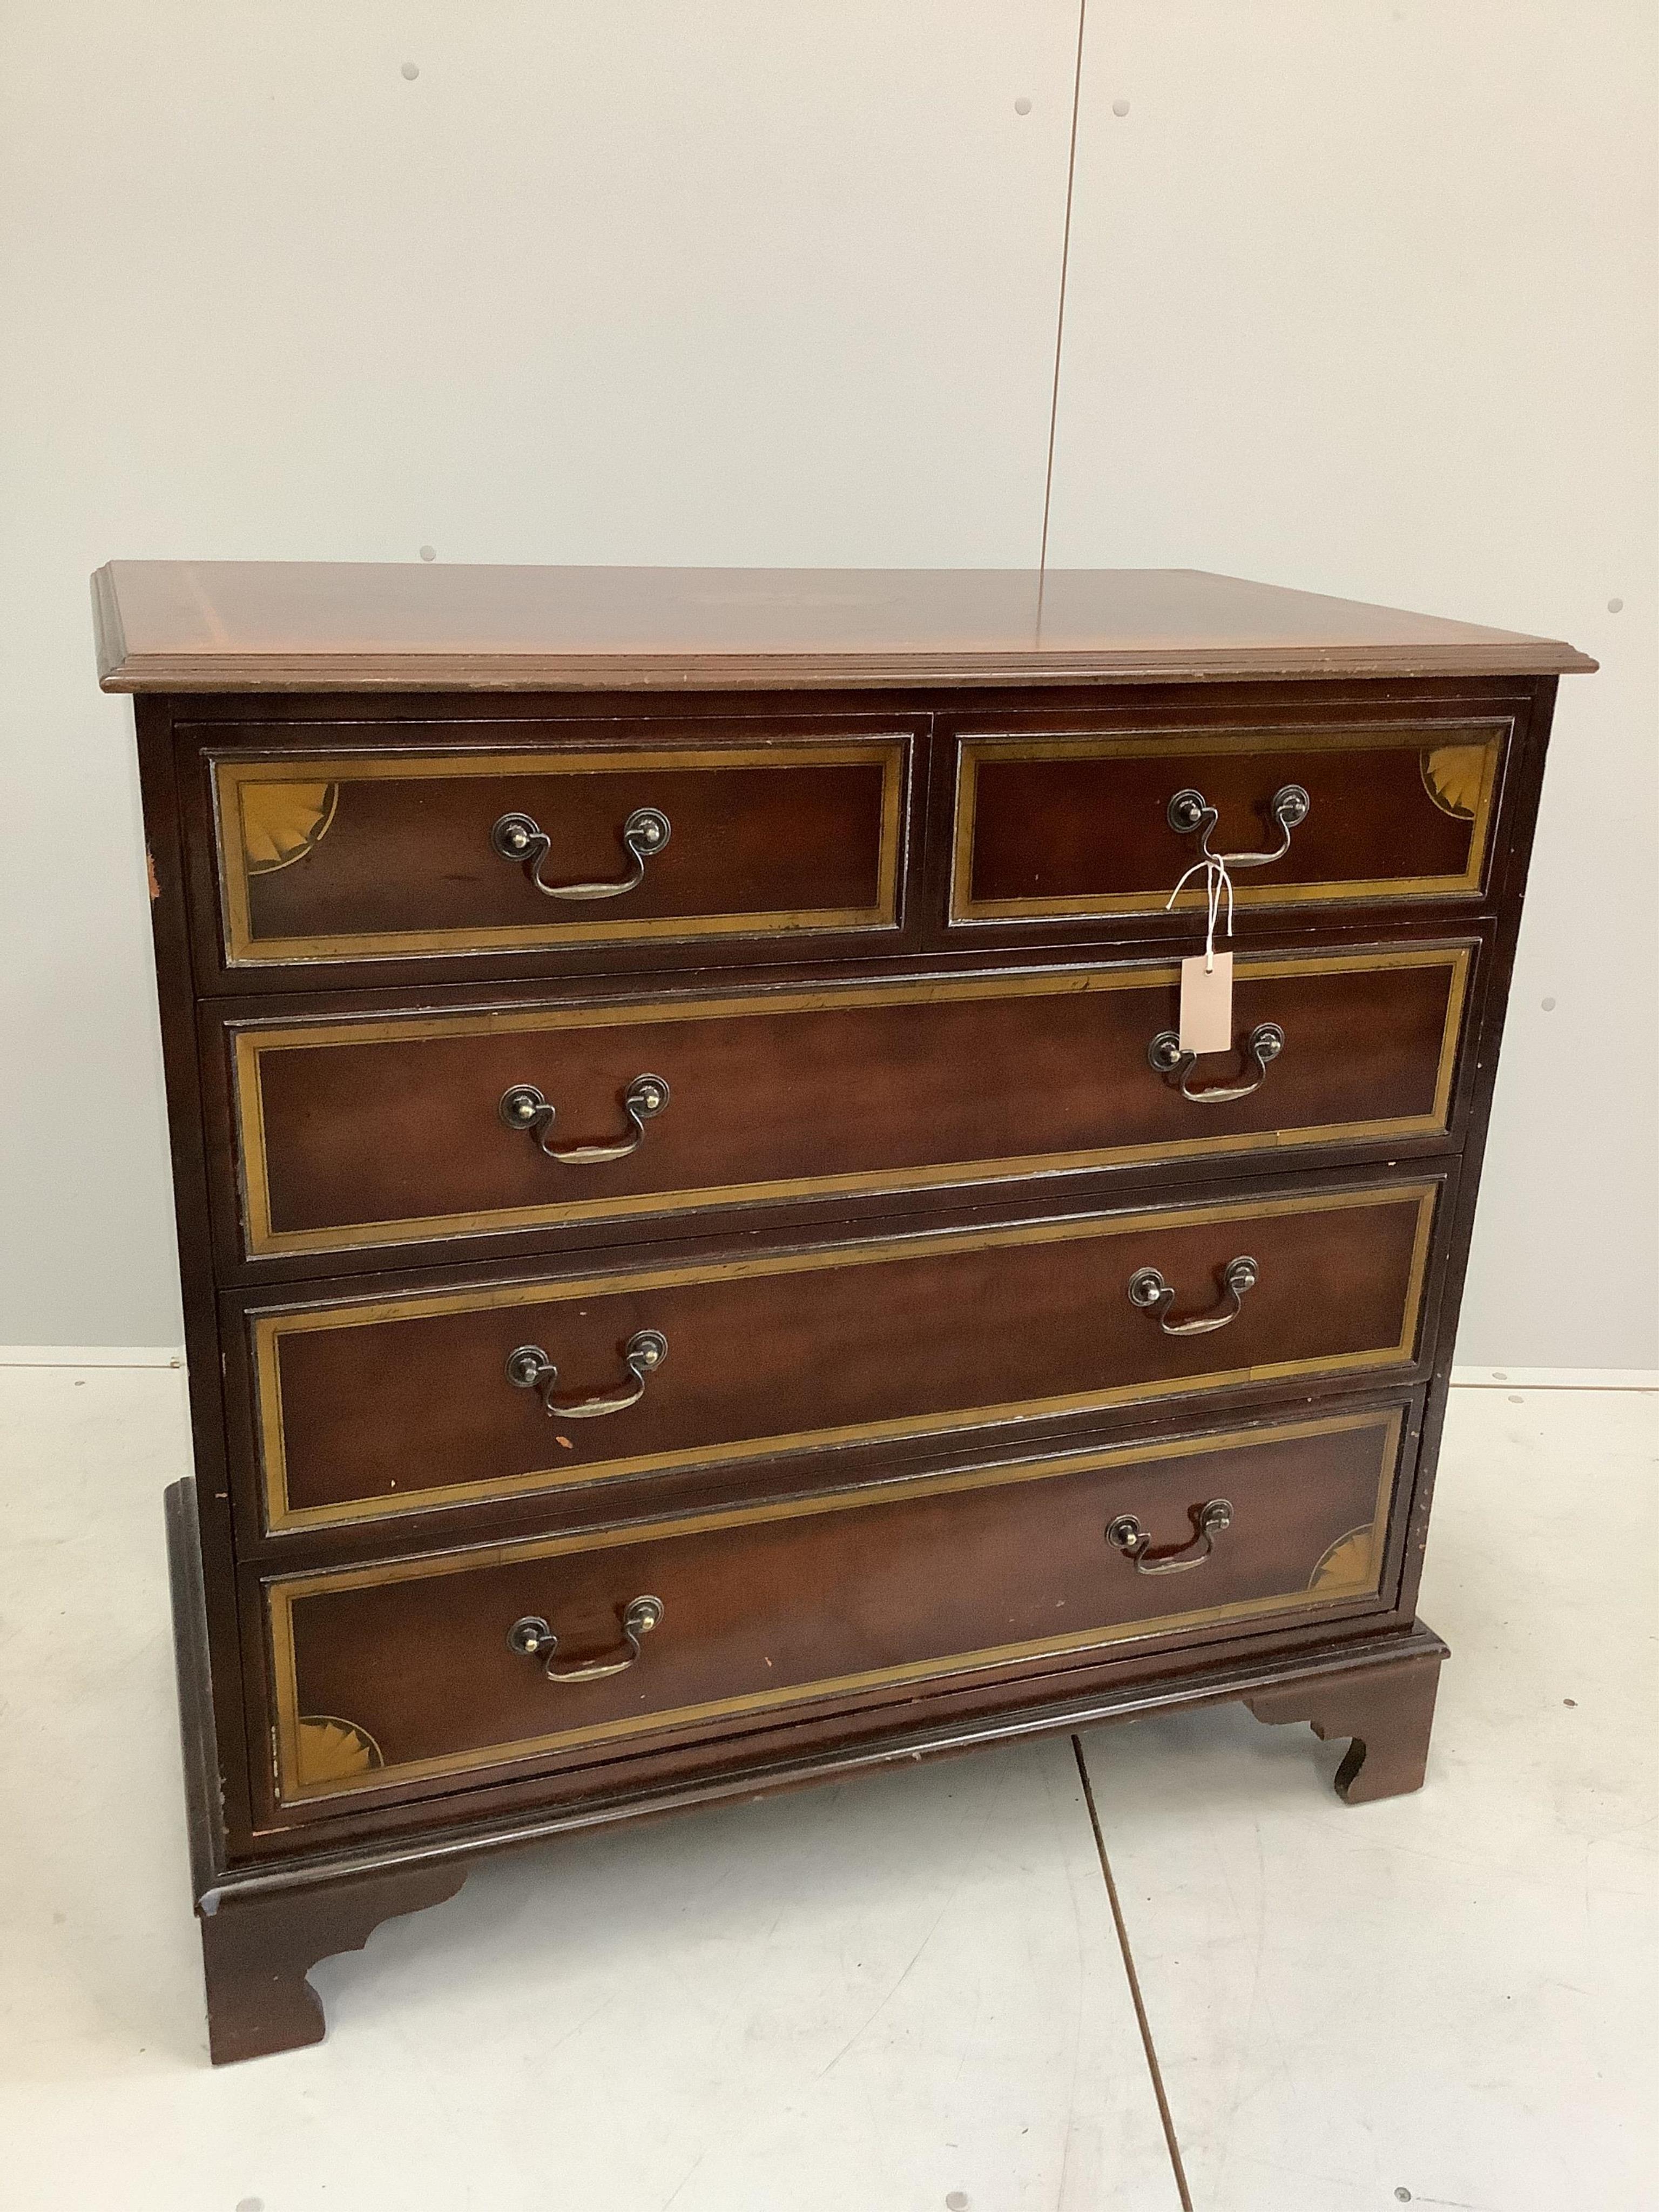 An Edwardian style inlaid mahogany chest of five drawers, width 94cm, depth 52cm, height 92cm